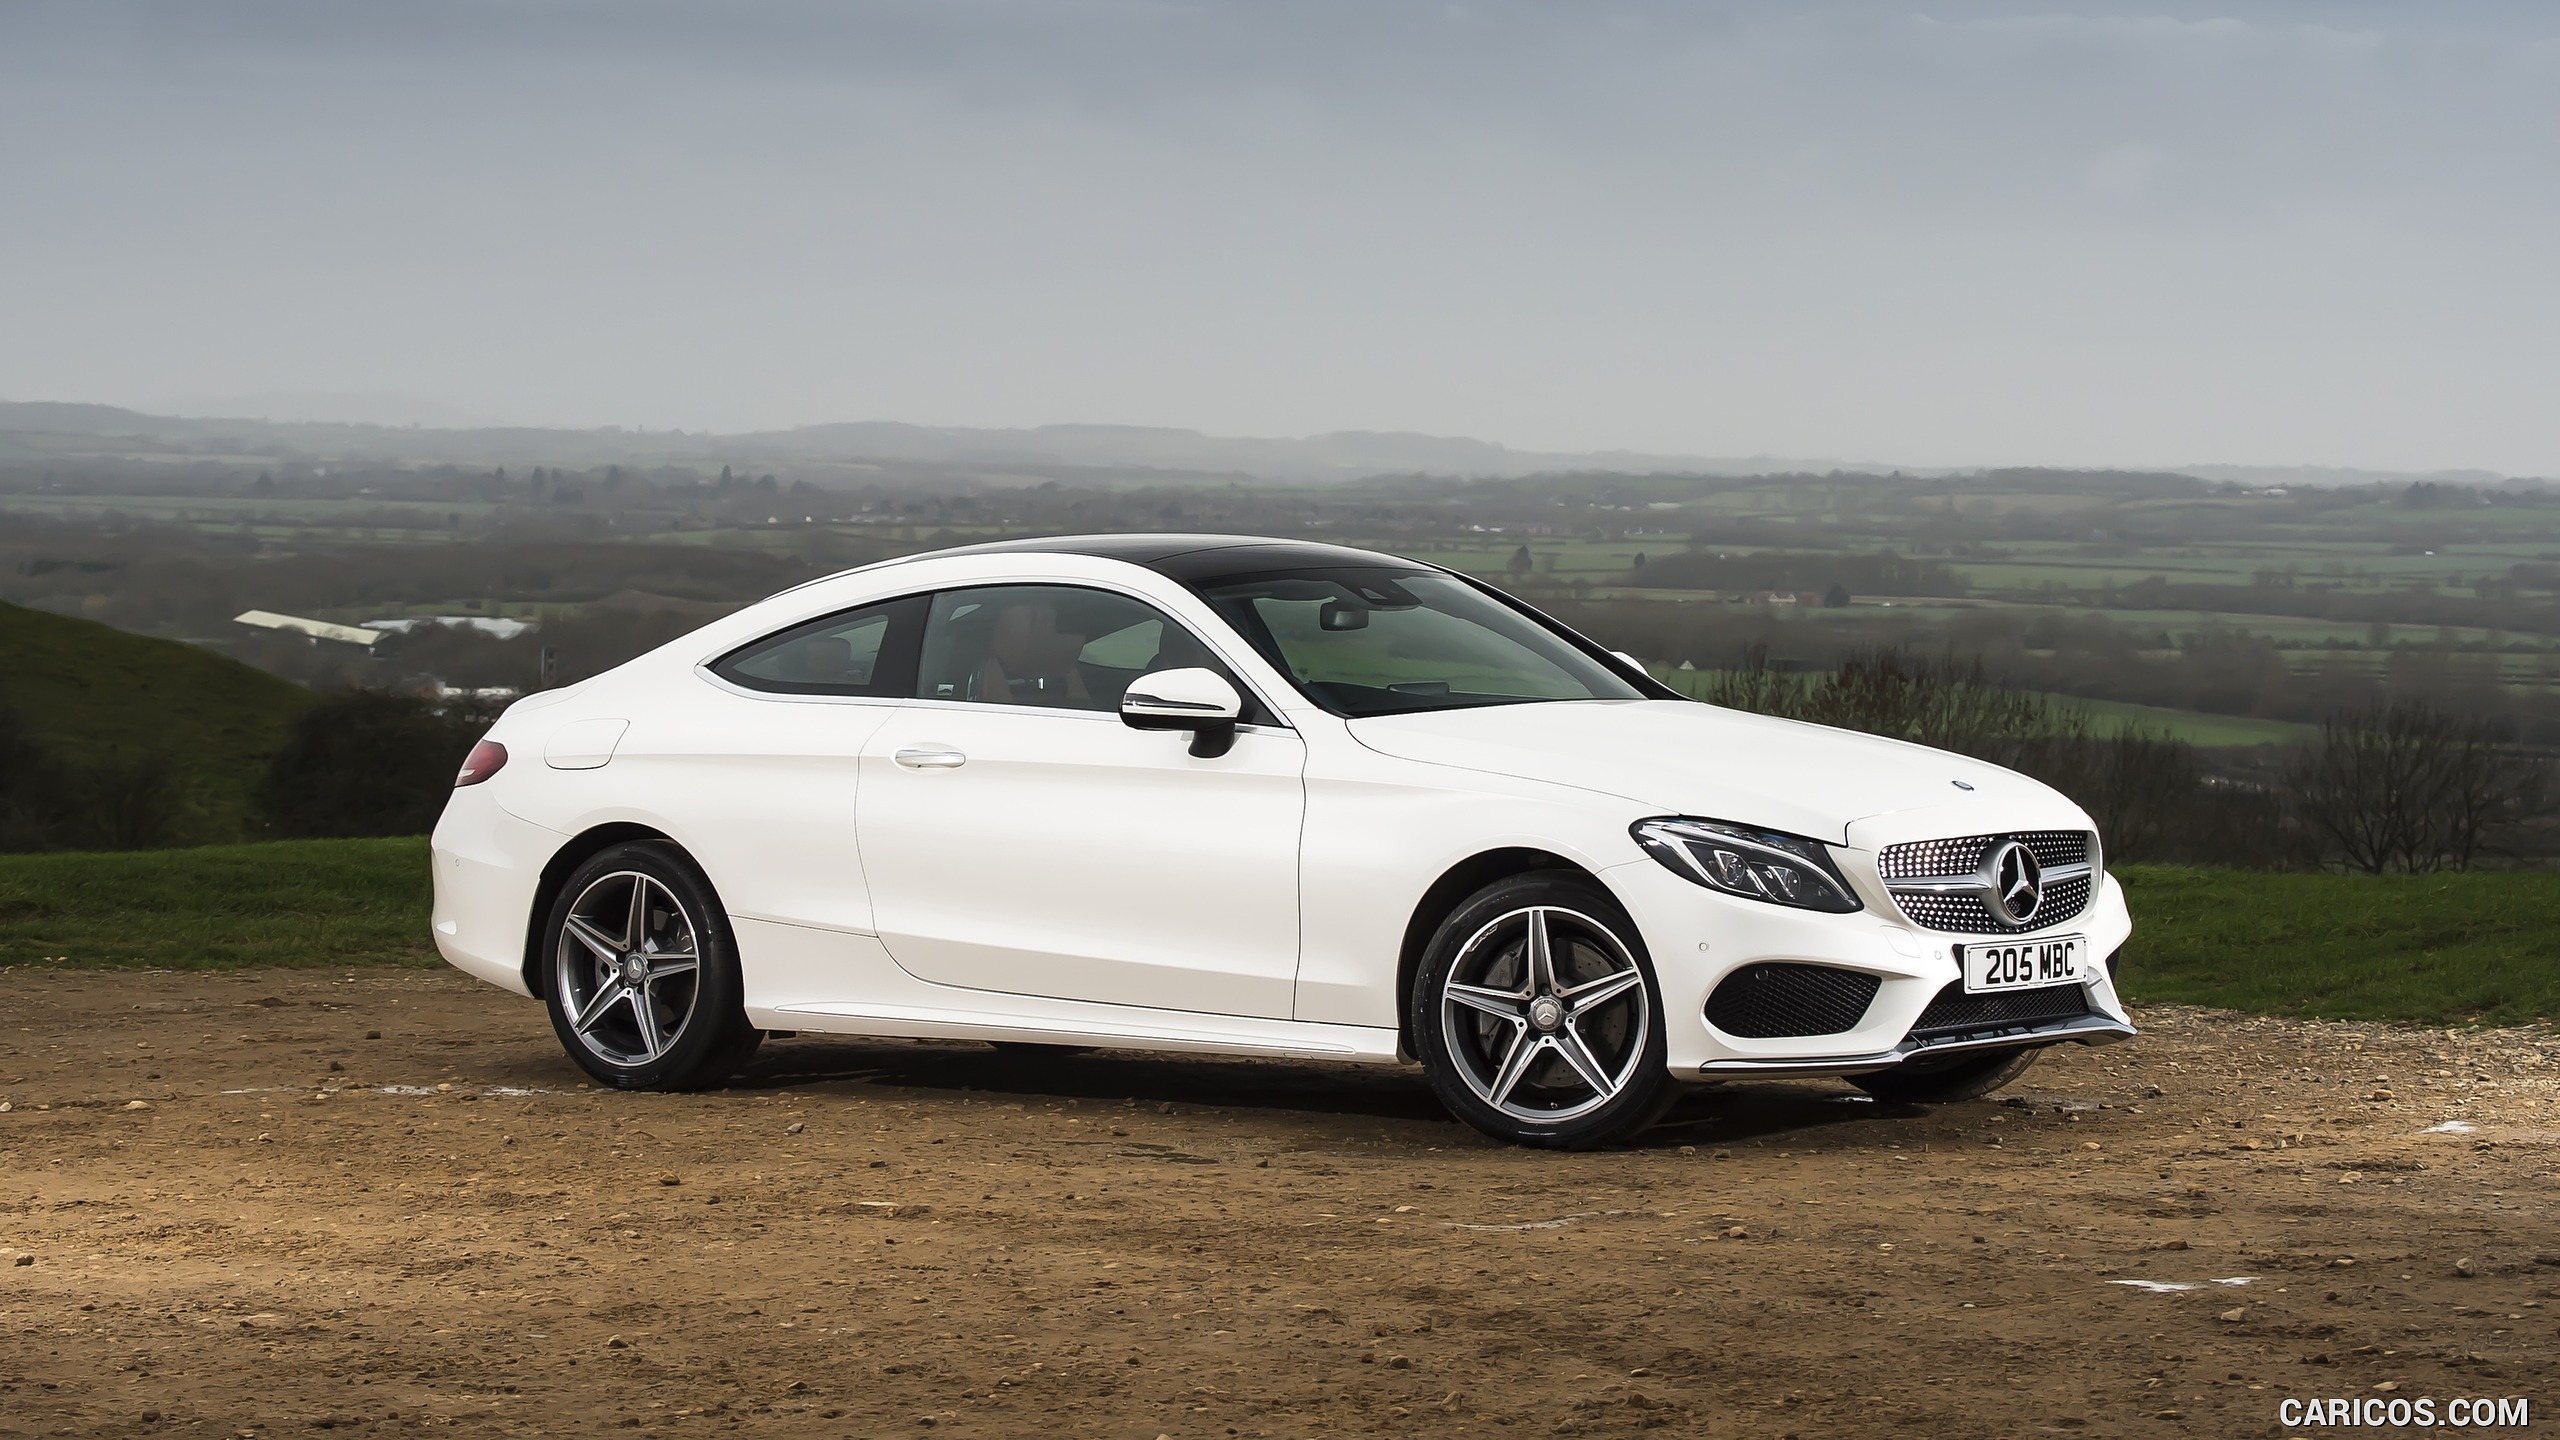 2017 Mercedes-Benz C-Class Coupe (UK-Spec) - Side, #110 of 210